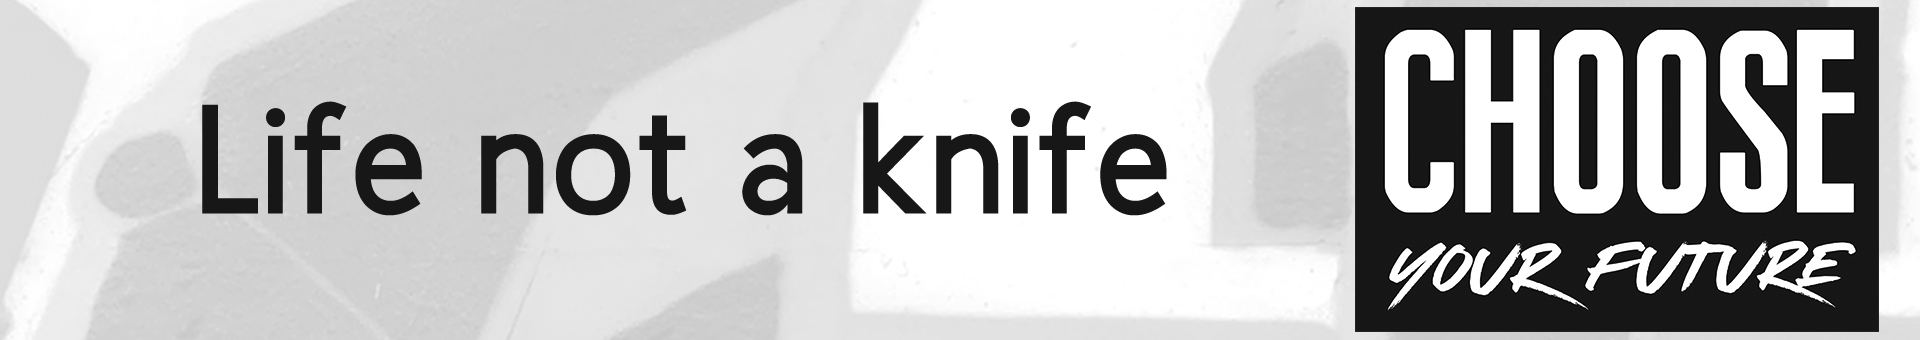 Life not a knife banner